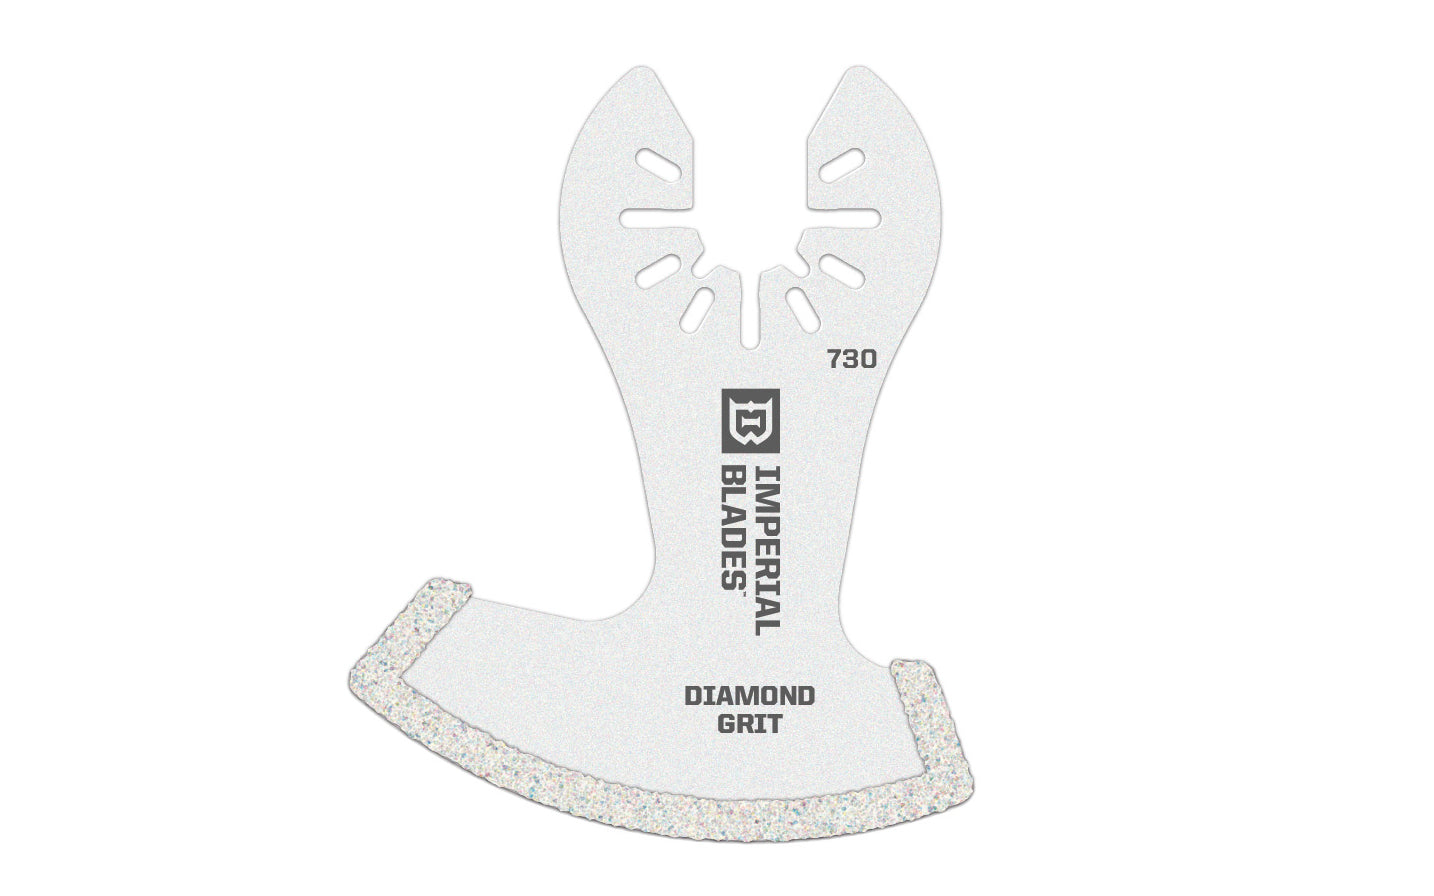 Imperial Blades "One Fit" 2-1/2" Diamond Grit Segment Boot Blade. Segment blade shape ideal for working in corners & on edges without overcut. Recommended applications: Brick Mortar, Manufactured Stone, Tile Grout, Plaster. Made in USA. Model IBOA730-1. 819846010599